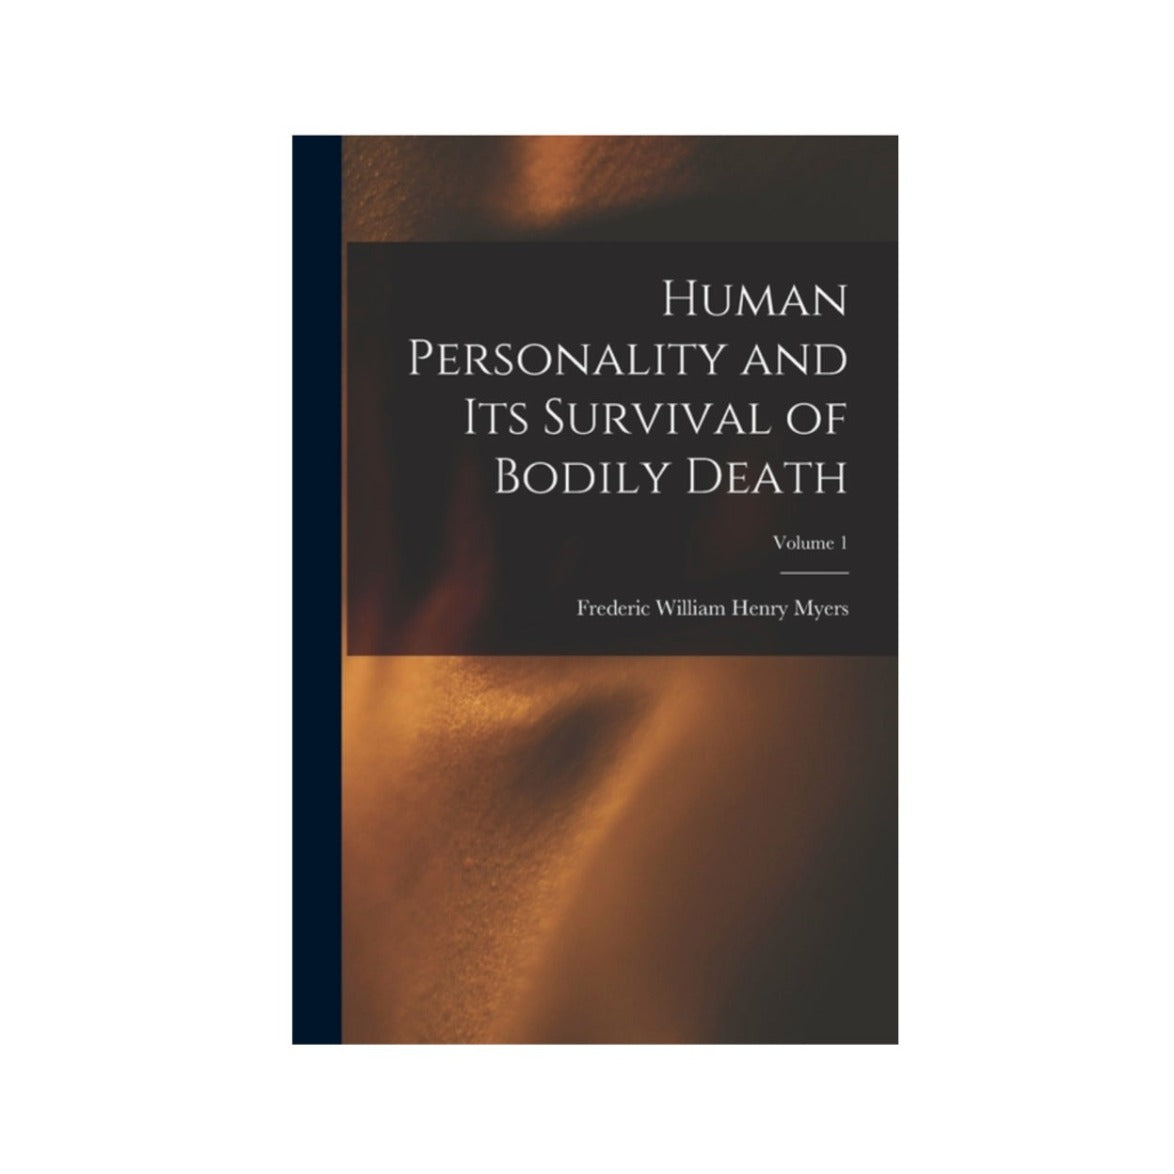 Human Personality and its Survival of Bodily Death - Vol 1 by Frederic Myers